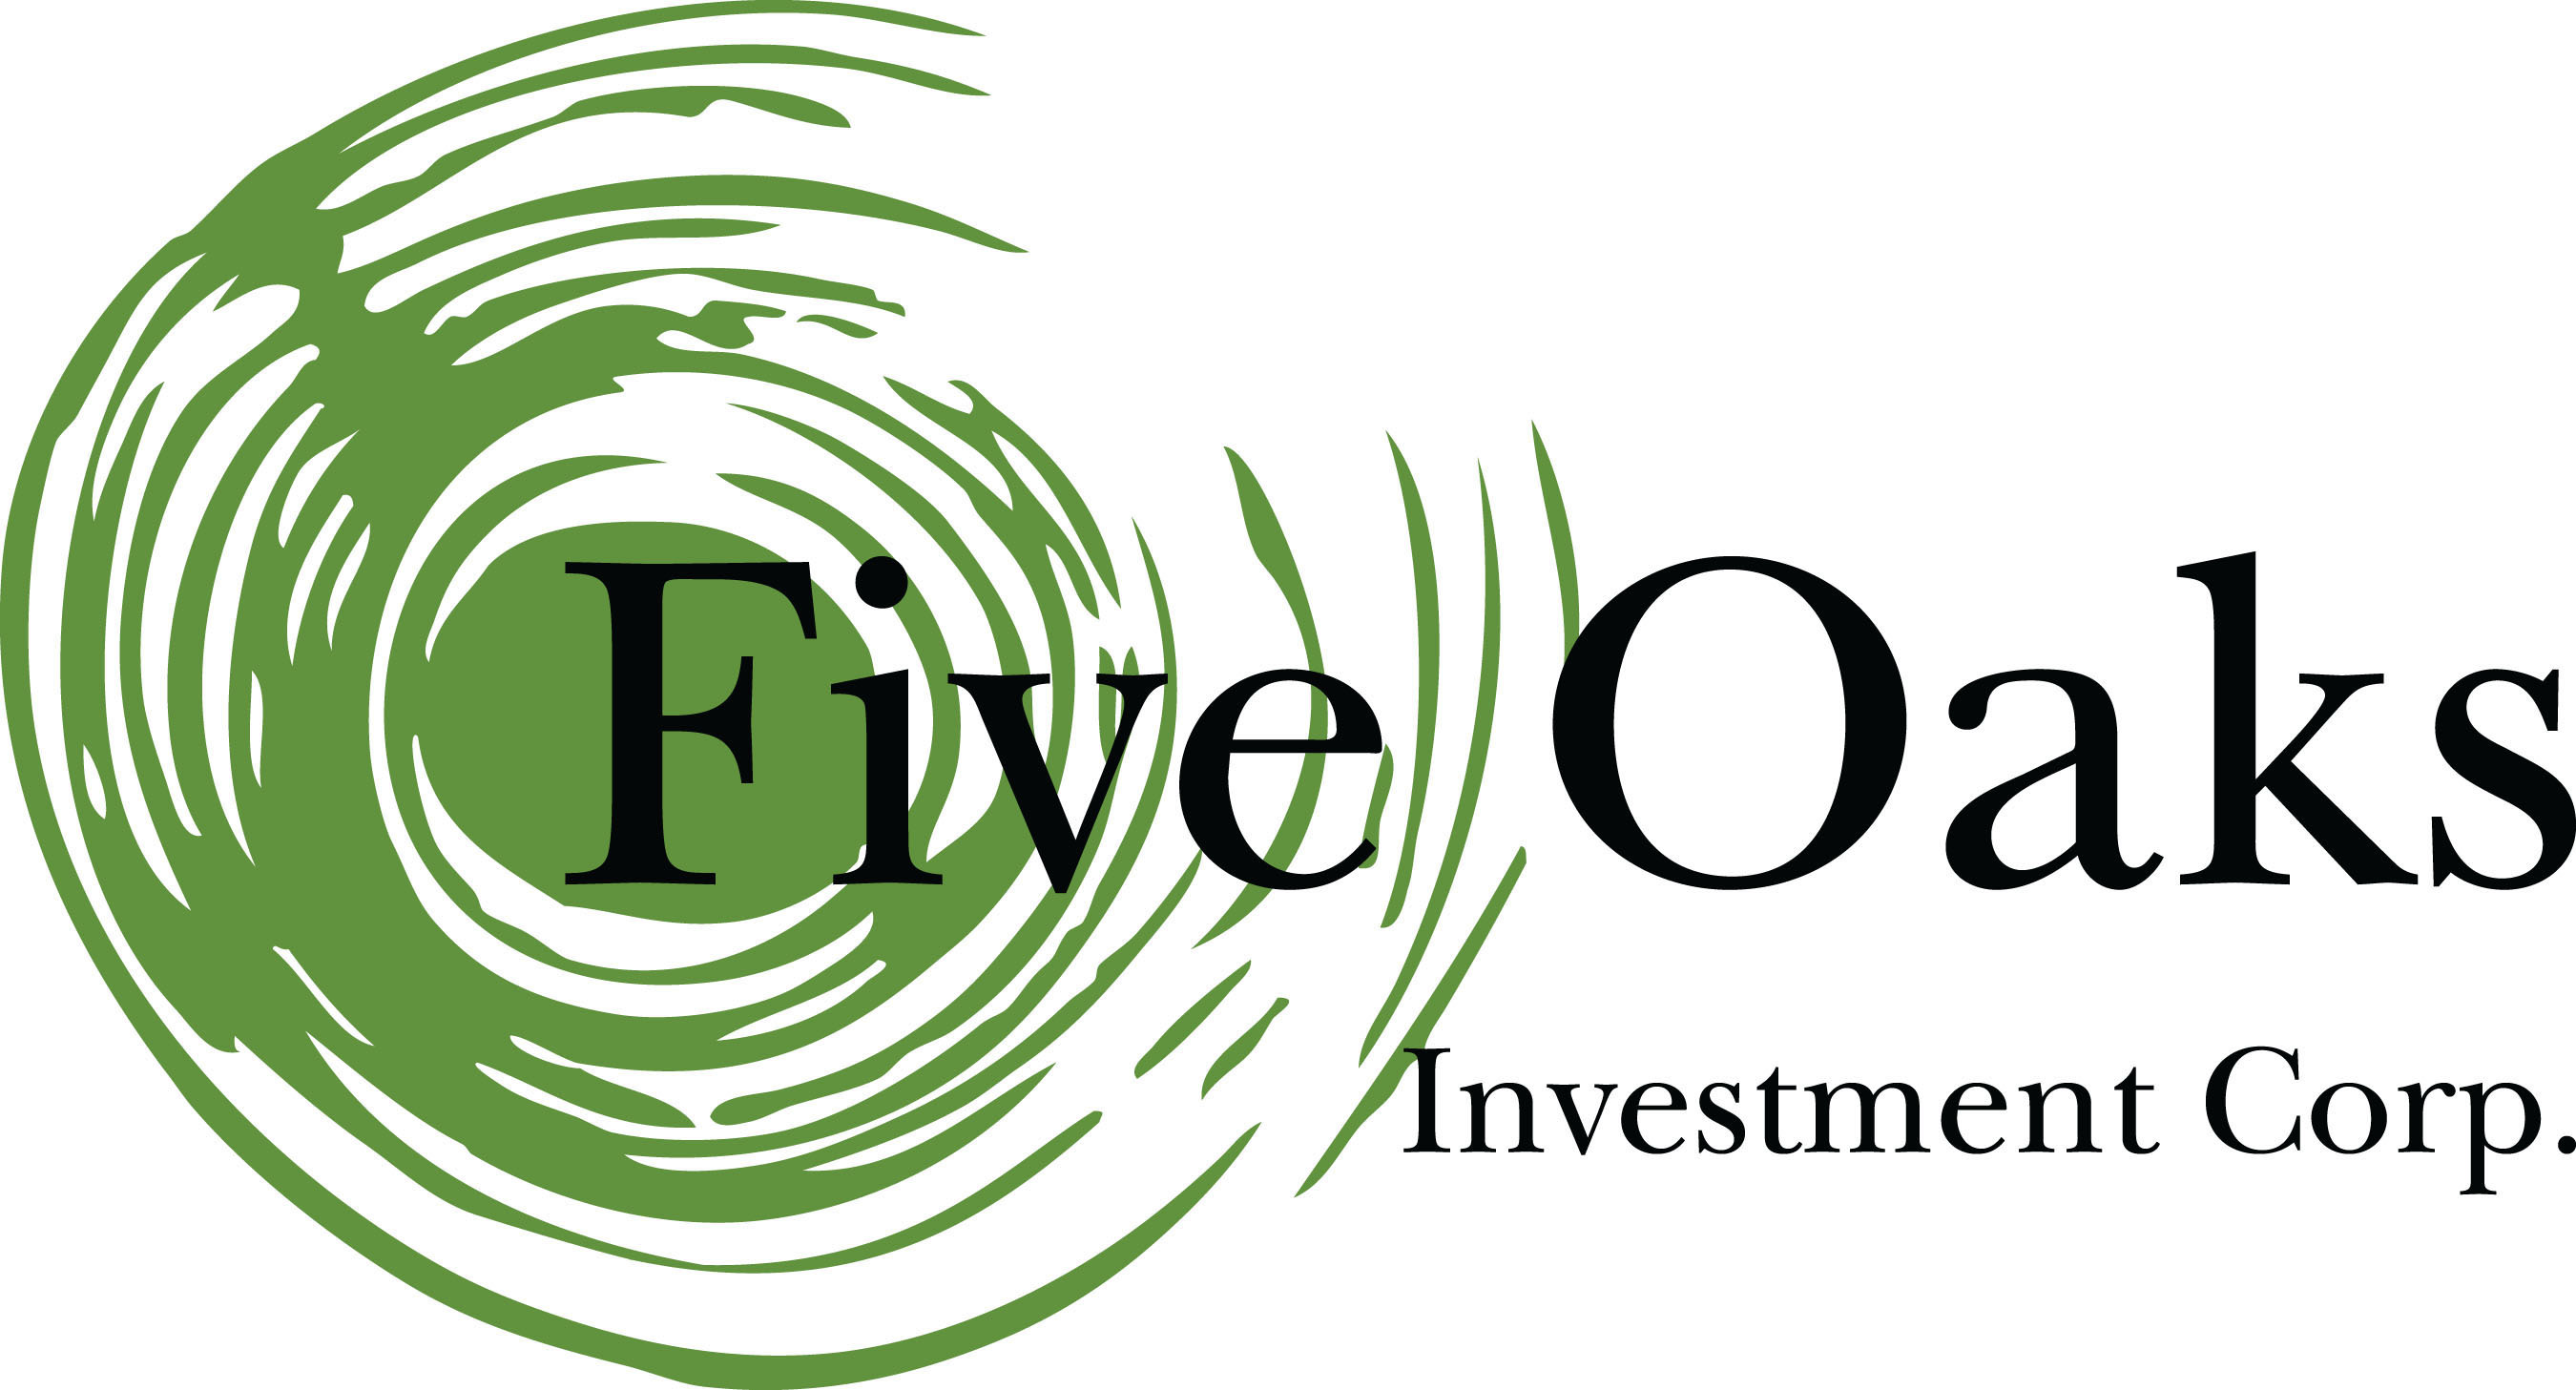 Five Oaks Investment Corp. logo.